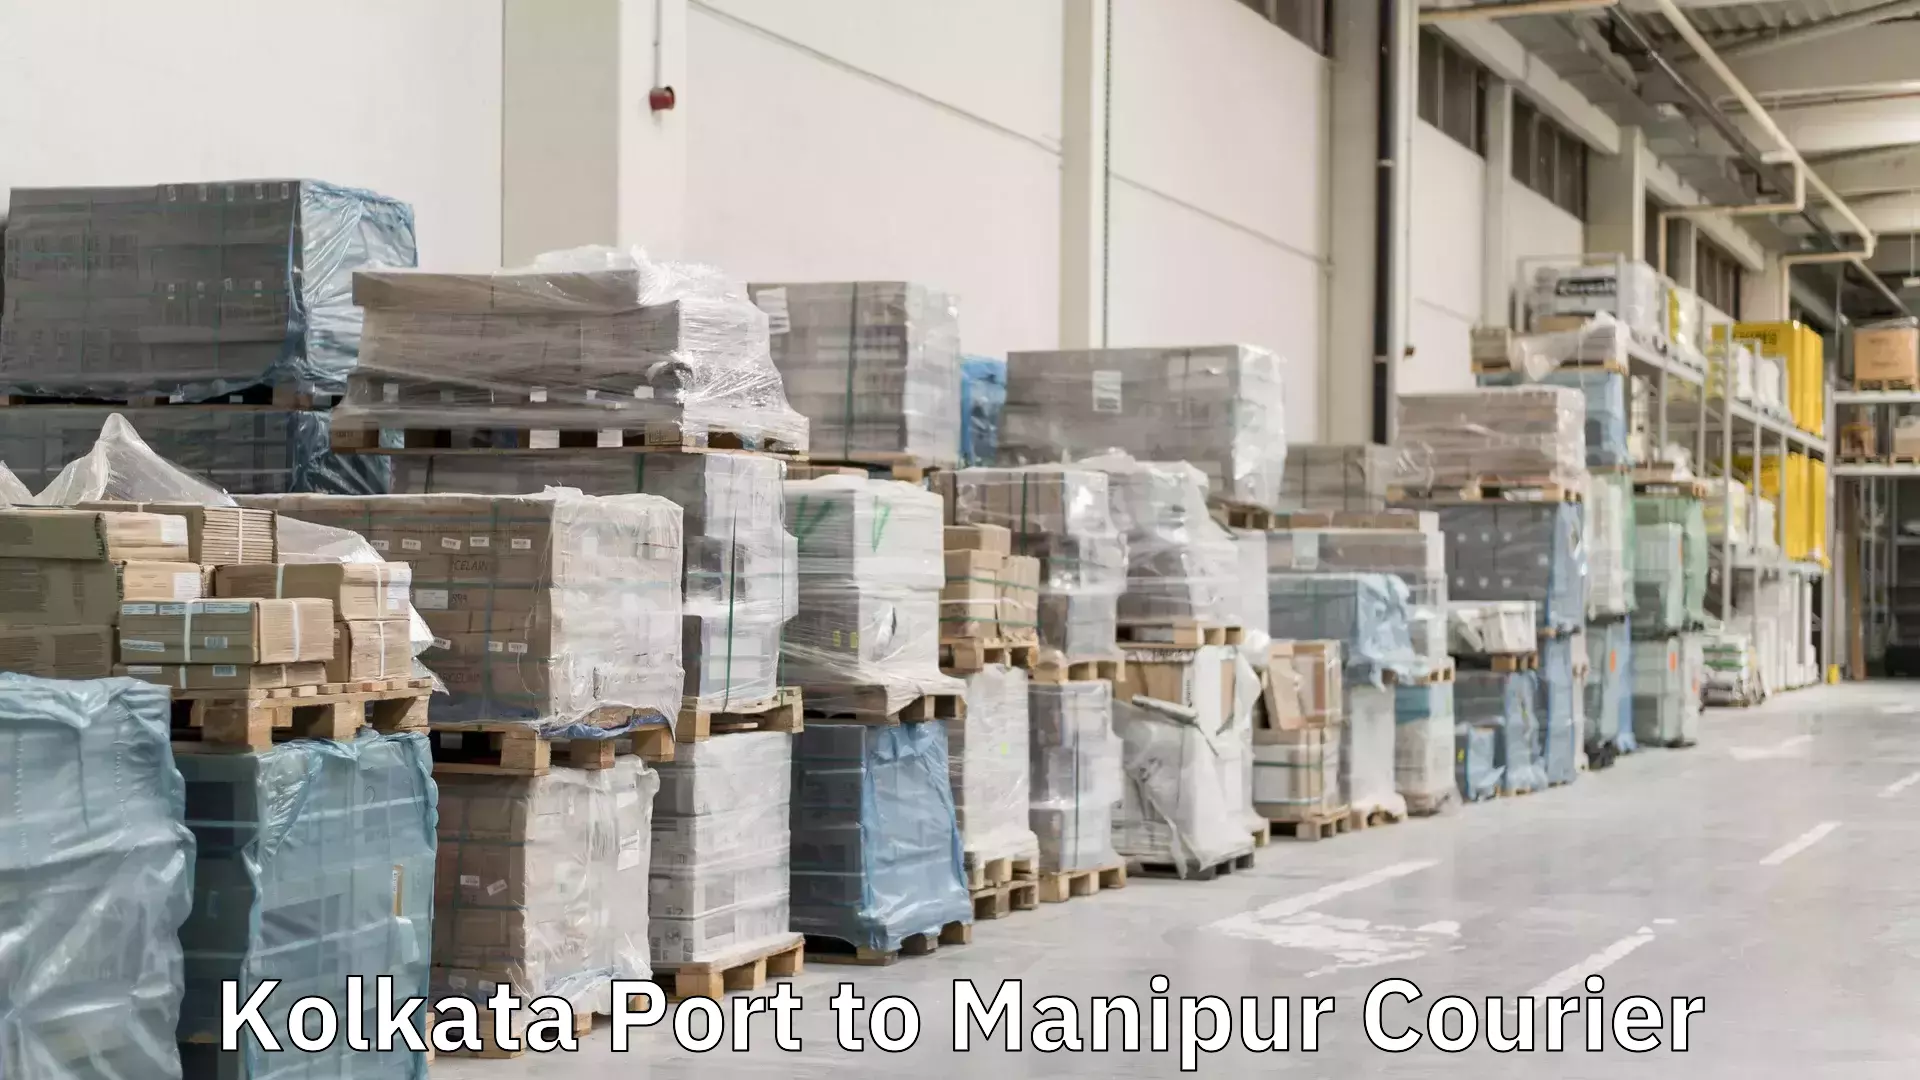 Flexible delivery schedules Kolkata Port to Tamenglong